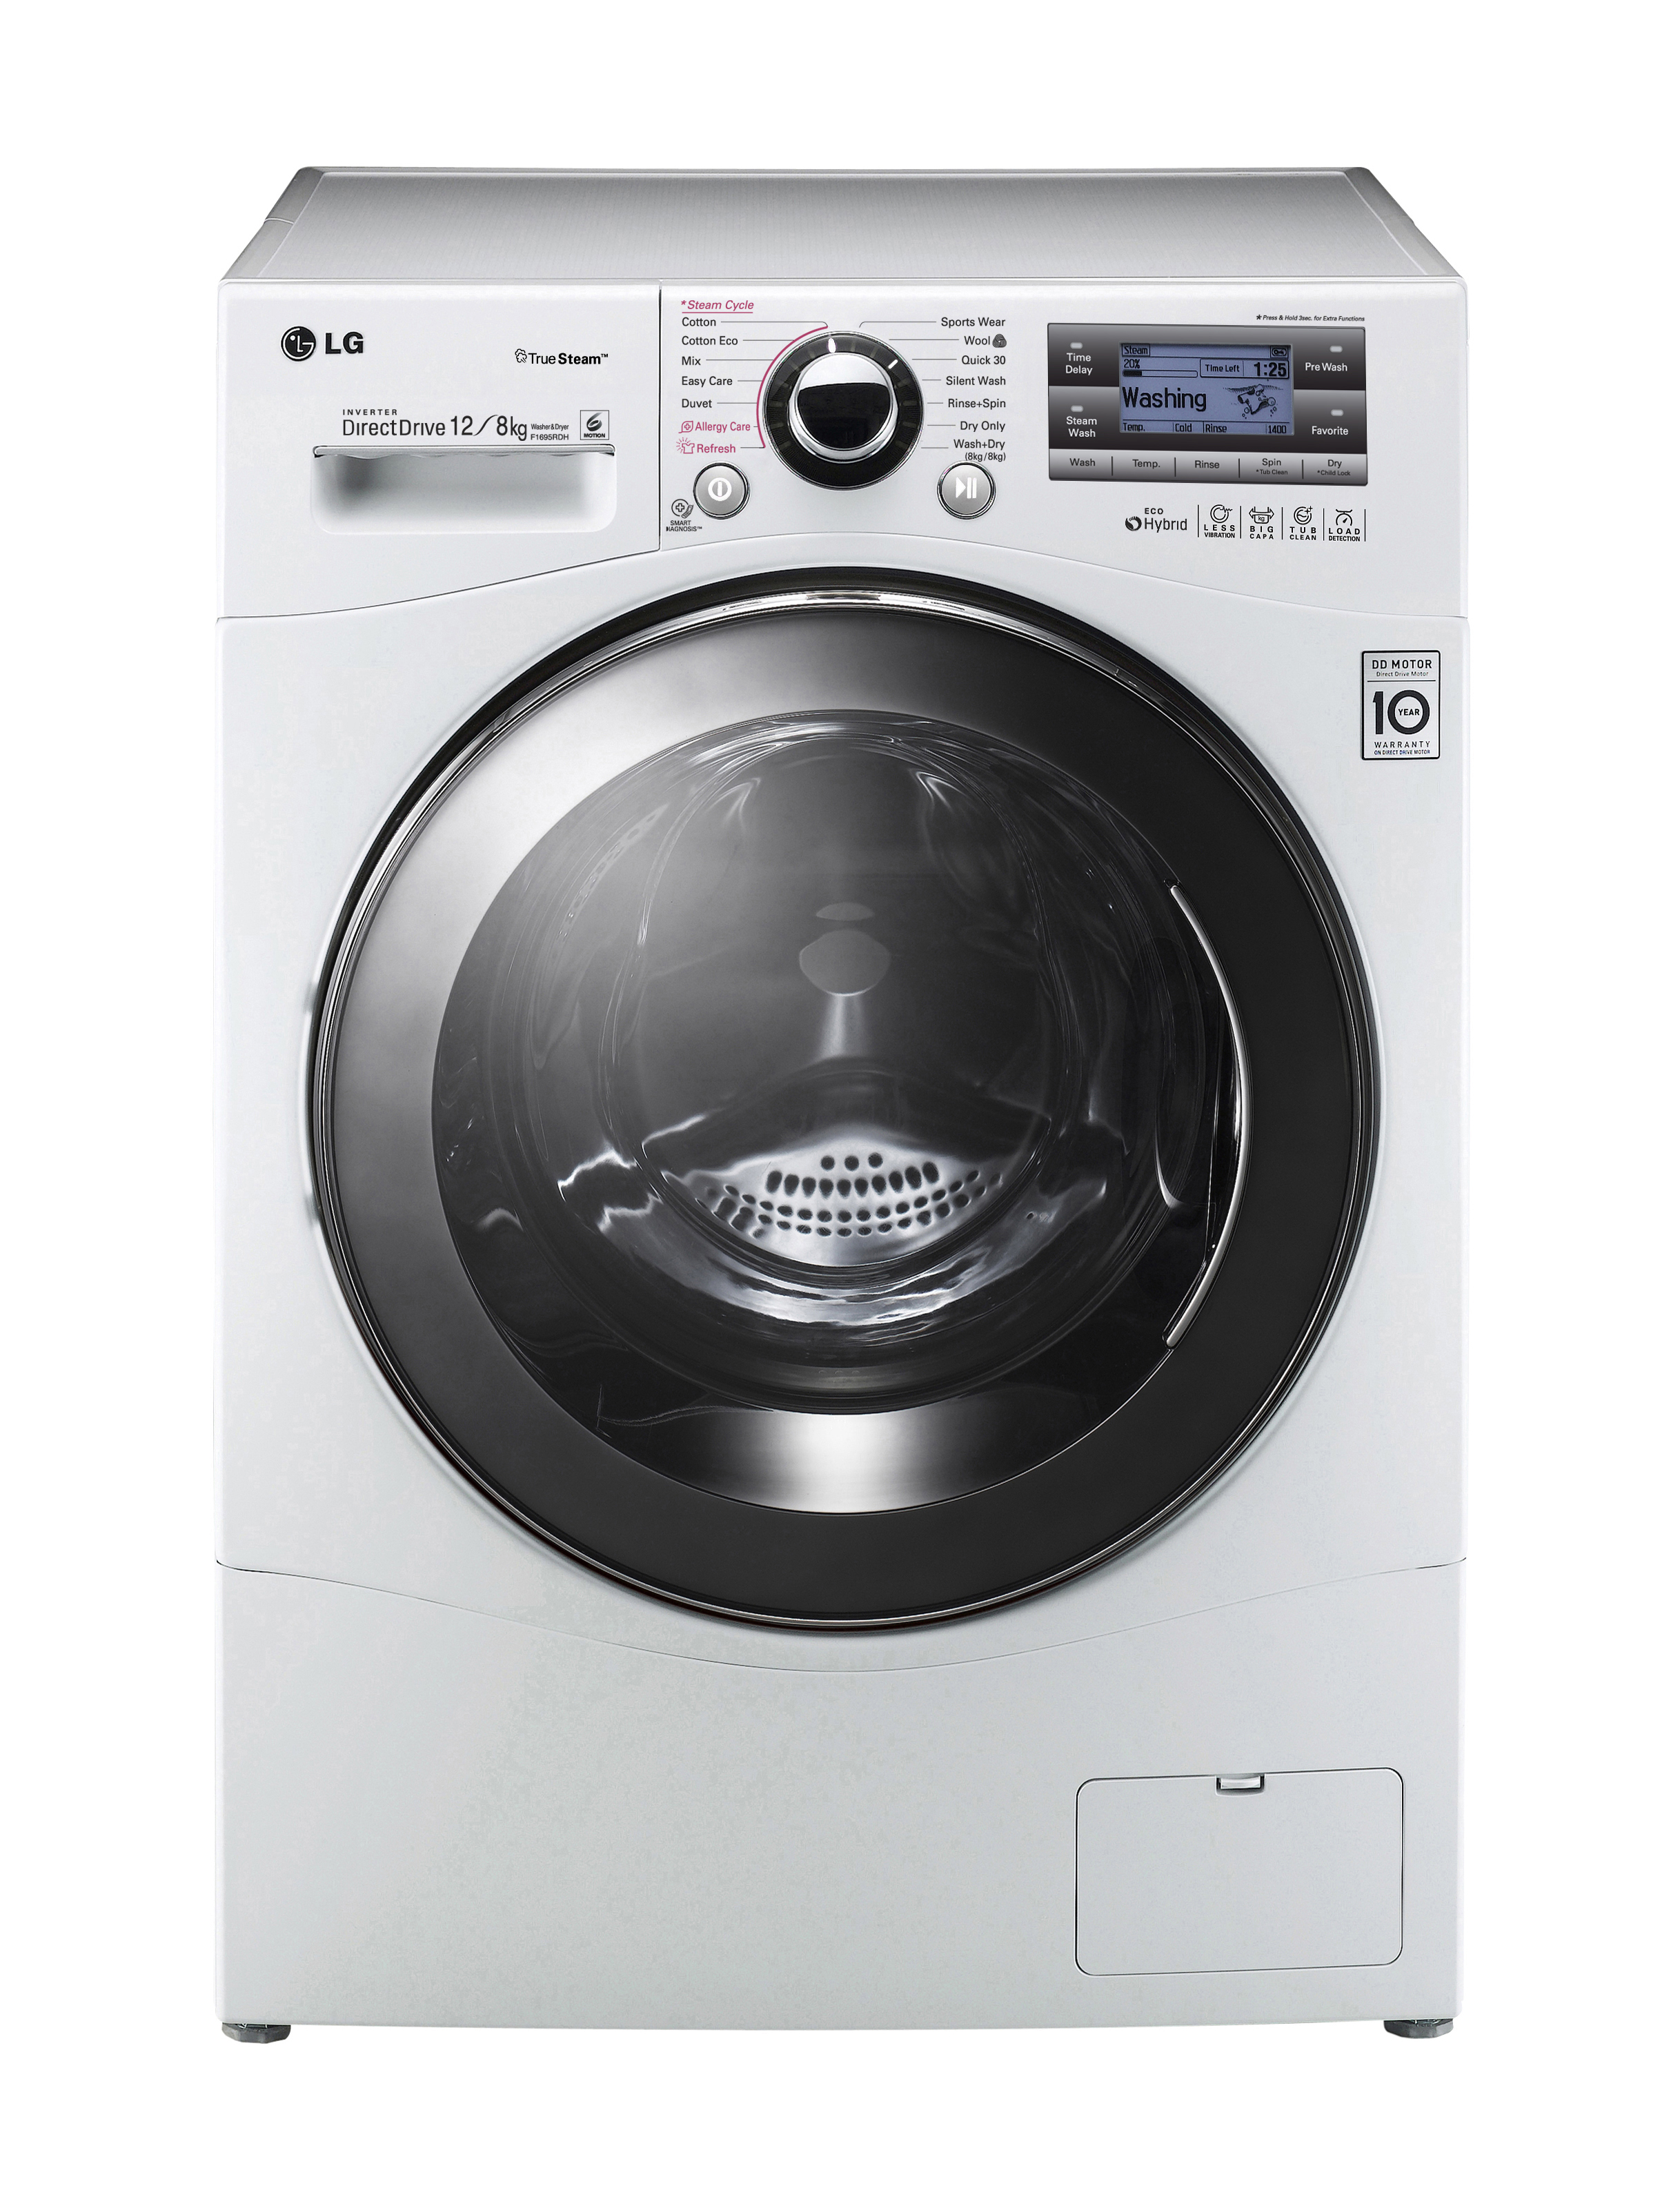 Front view of the LG Eco-Hybrid washer dryer